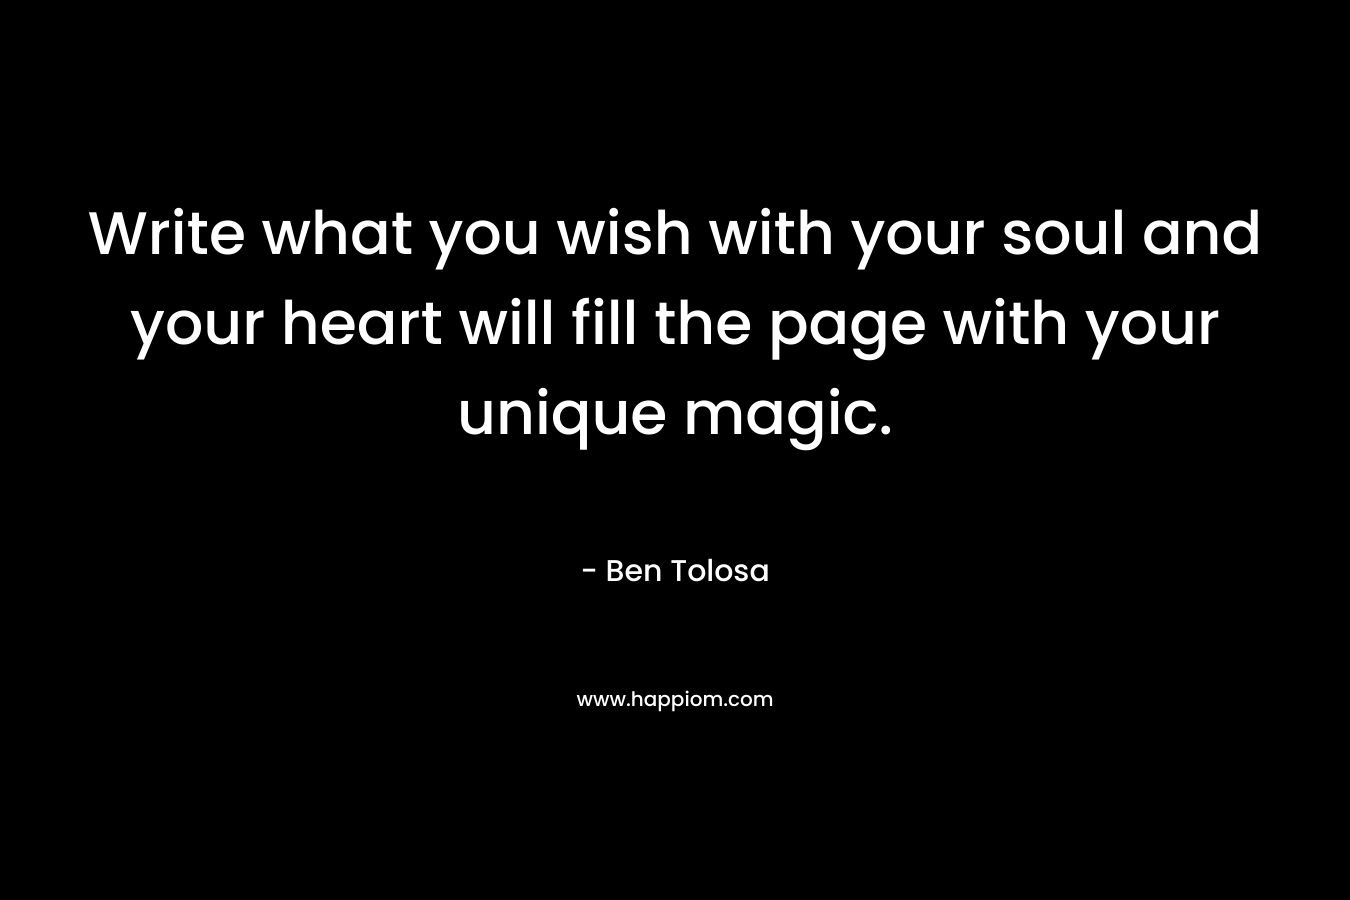 Write what you wish with your soul and your heart will fill the page with your unique magic. – Ben Tolosa